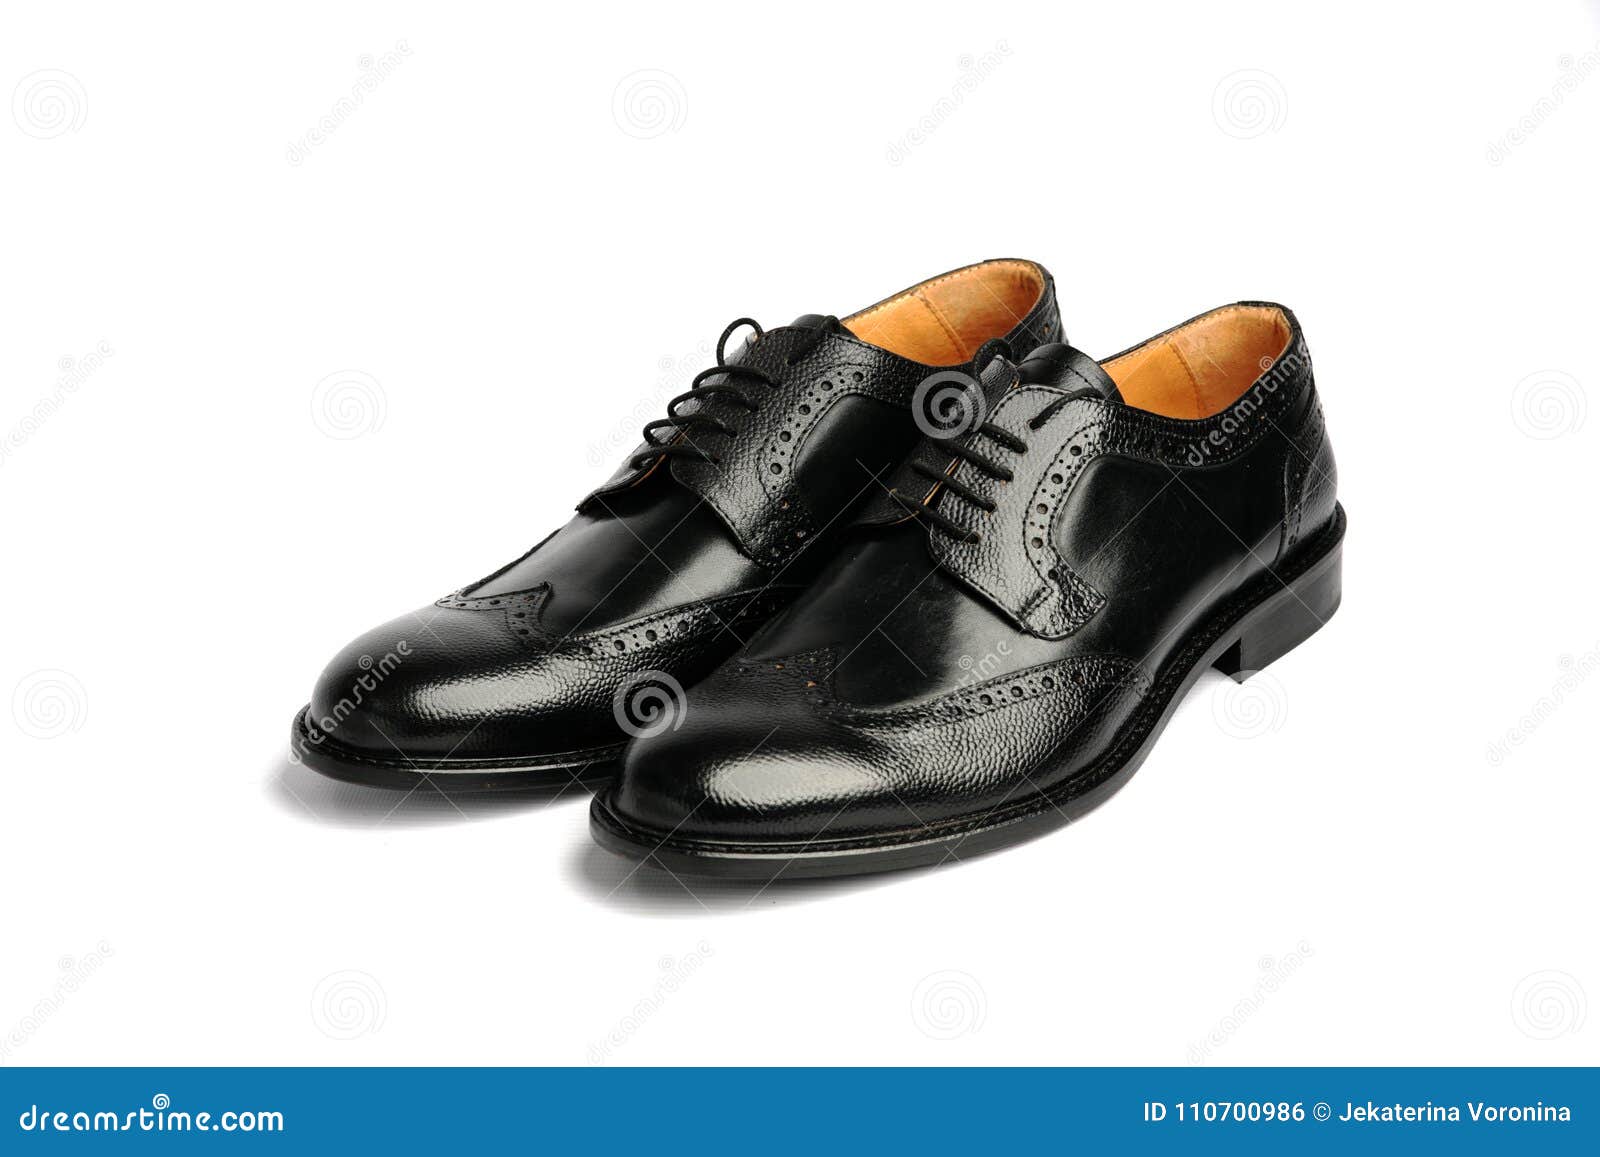 Male Black Shoes on a White Background Stock Photo - Image of casual ...